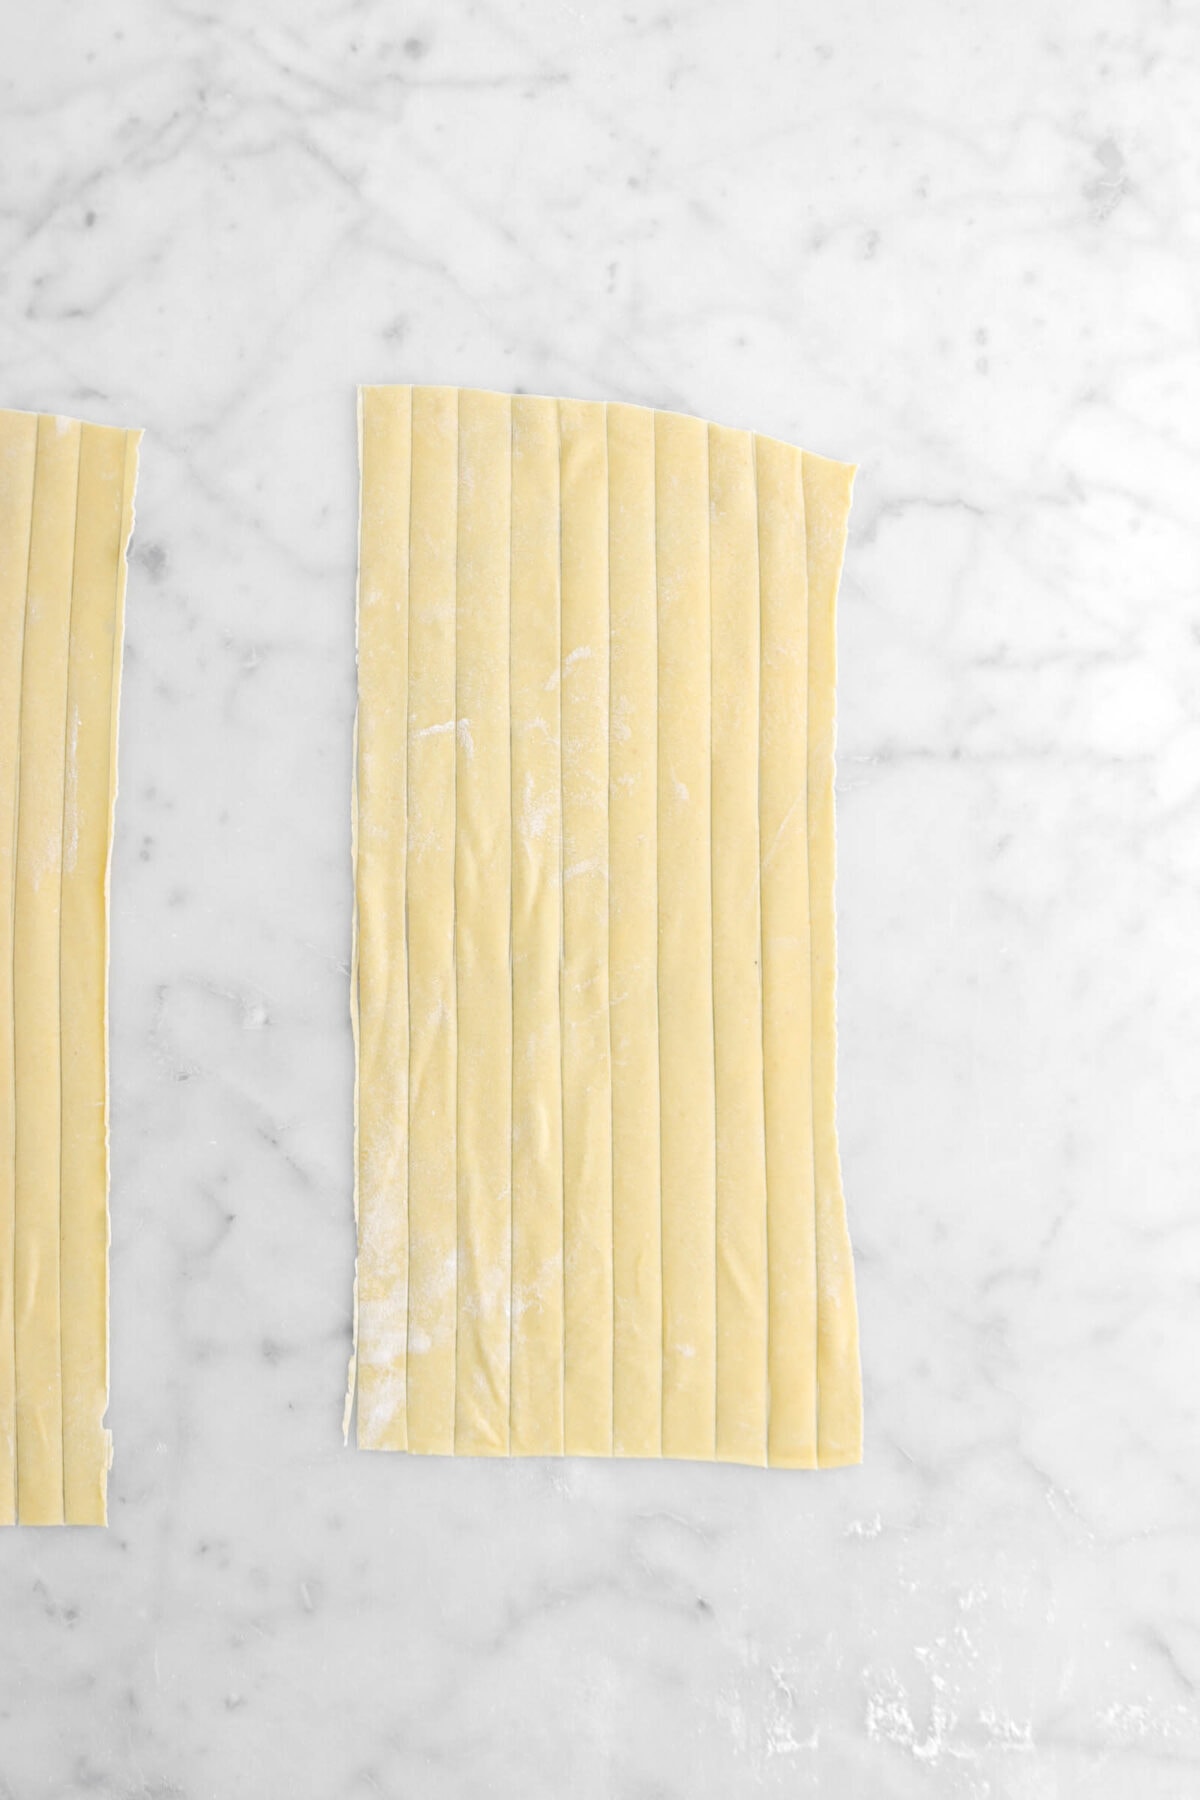 pasta cut into strips on marble surface.